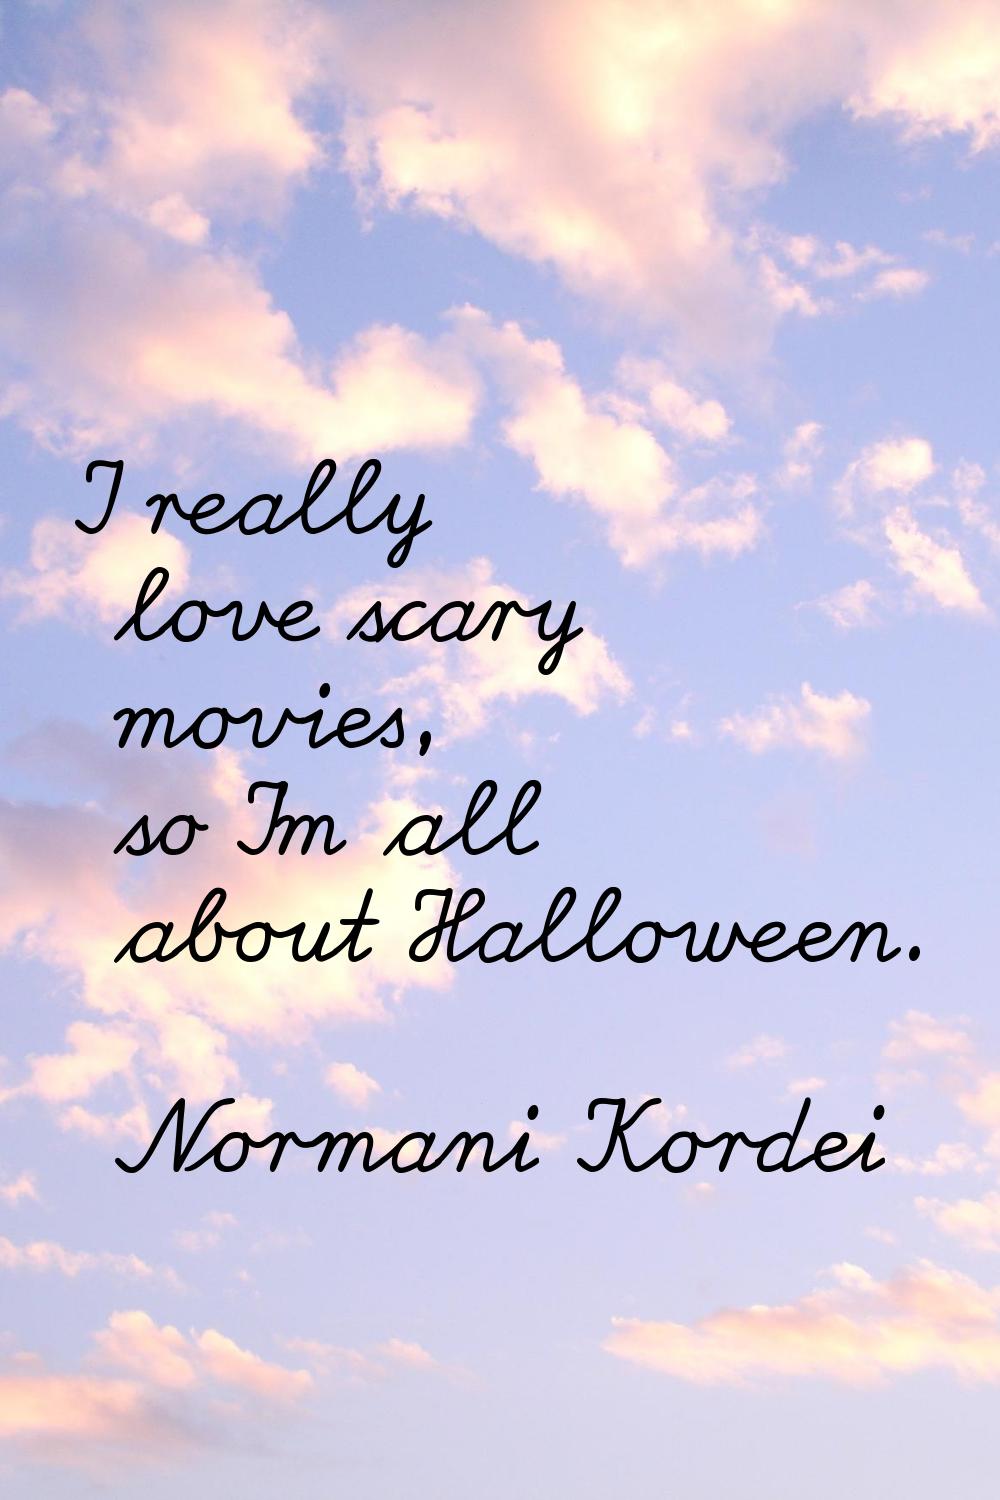 I really love scary movies, so I'm all about Halloween.